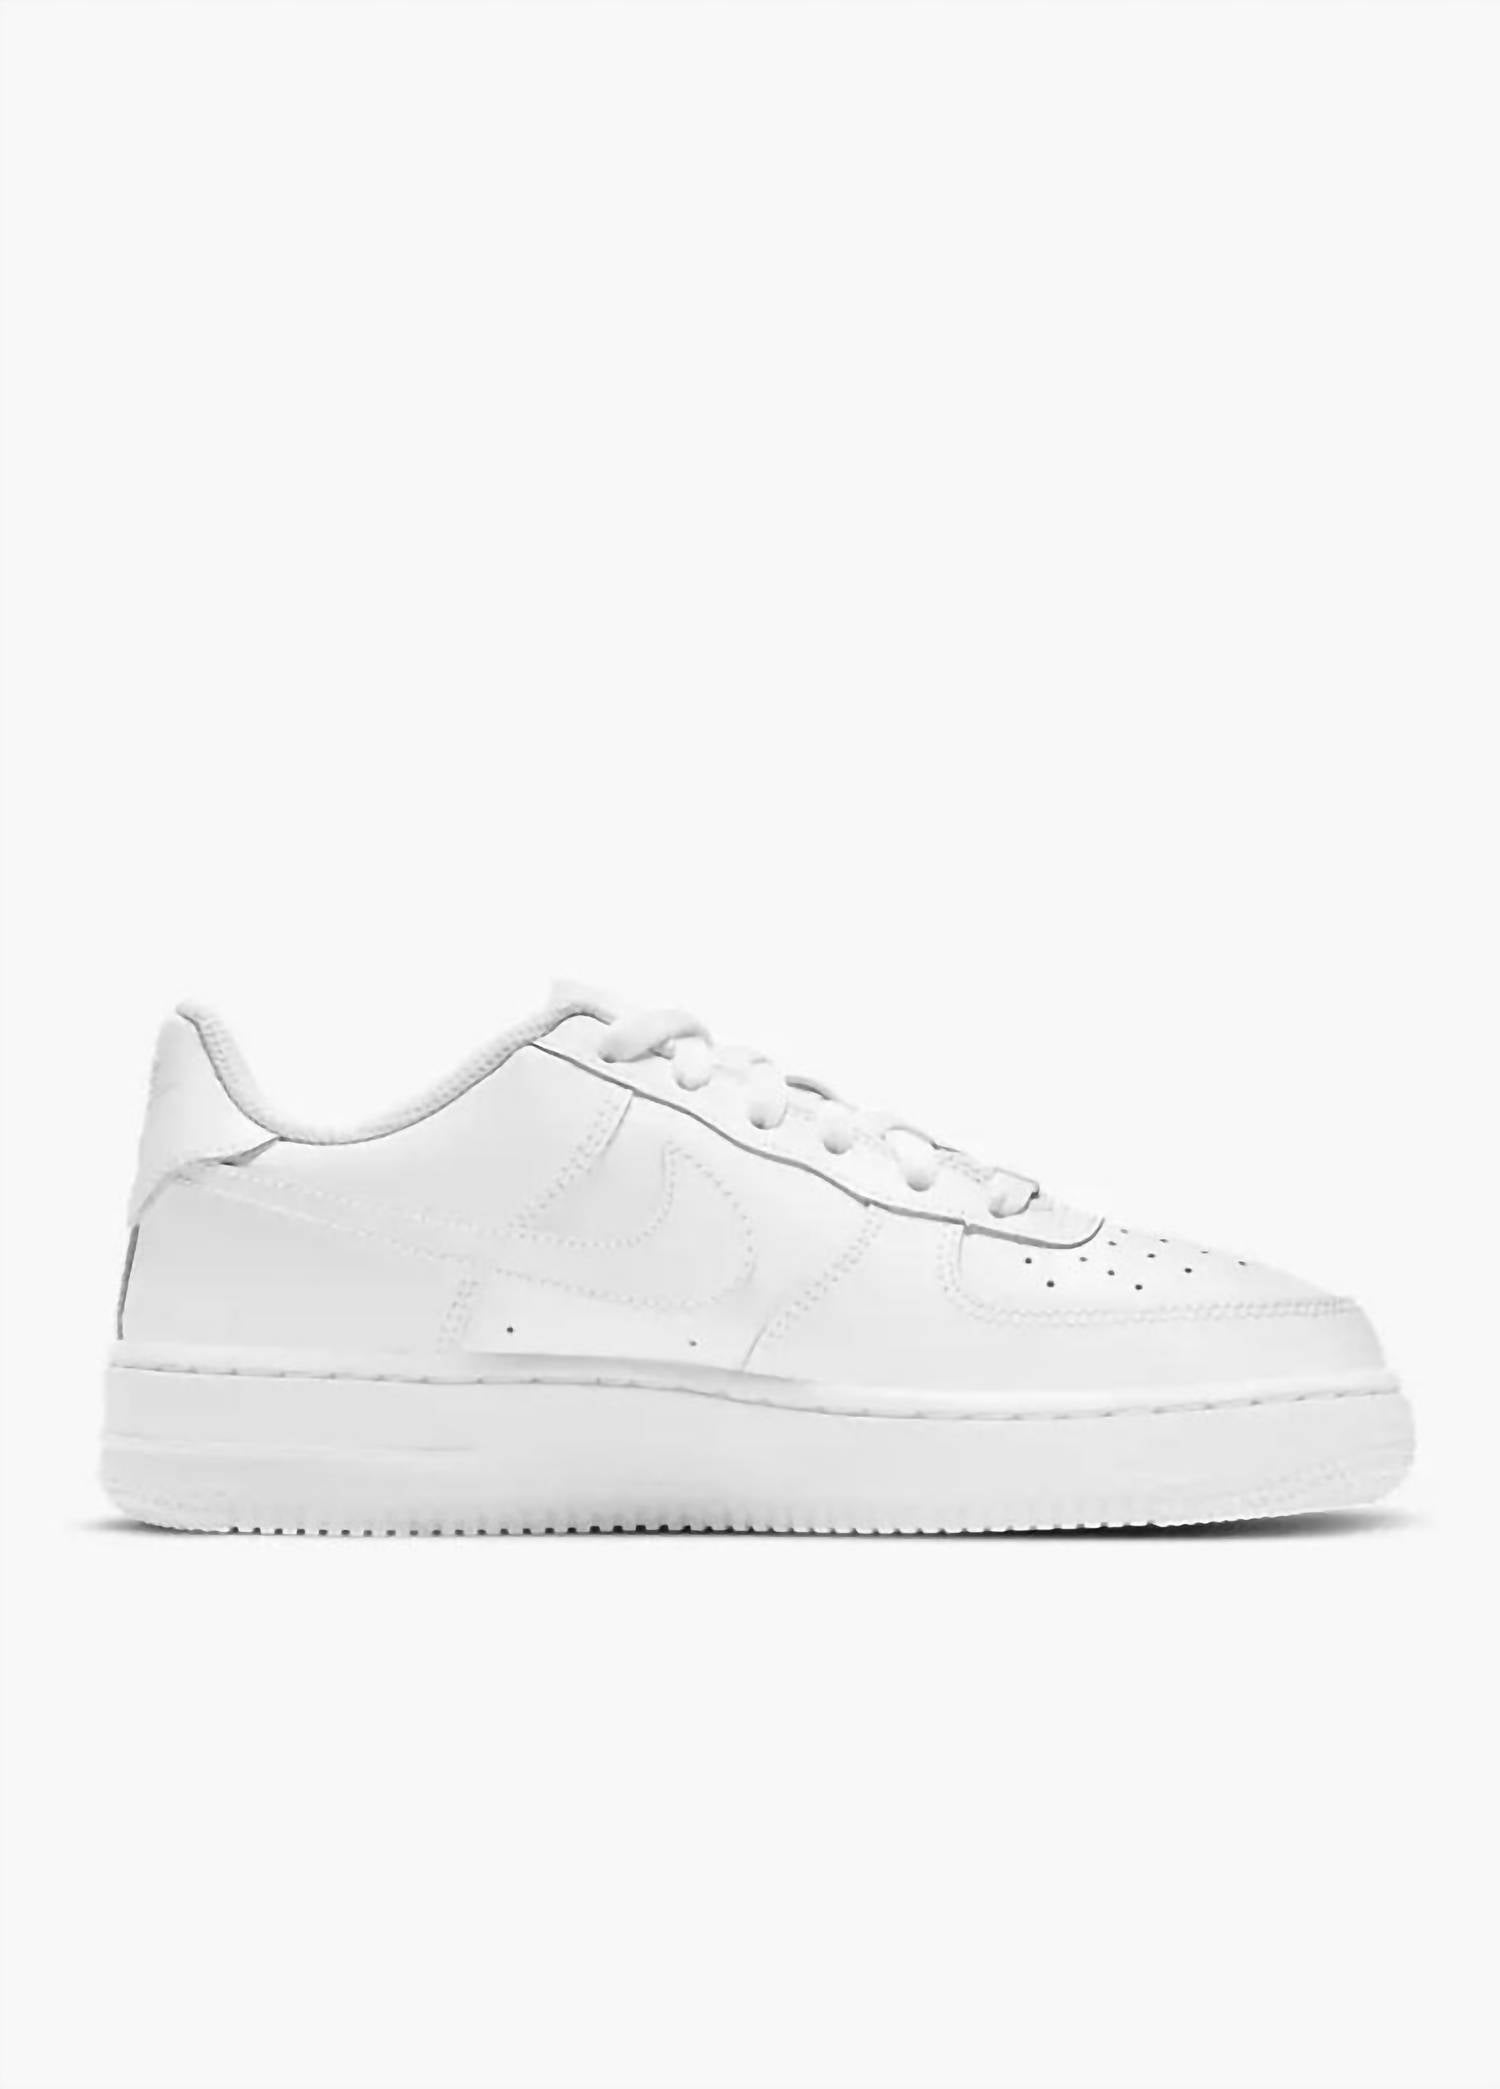 NIKE Kids Air Force 1 Le (Gs) Sneaker in White/White